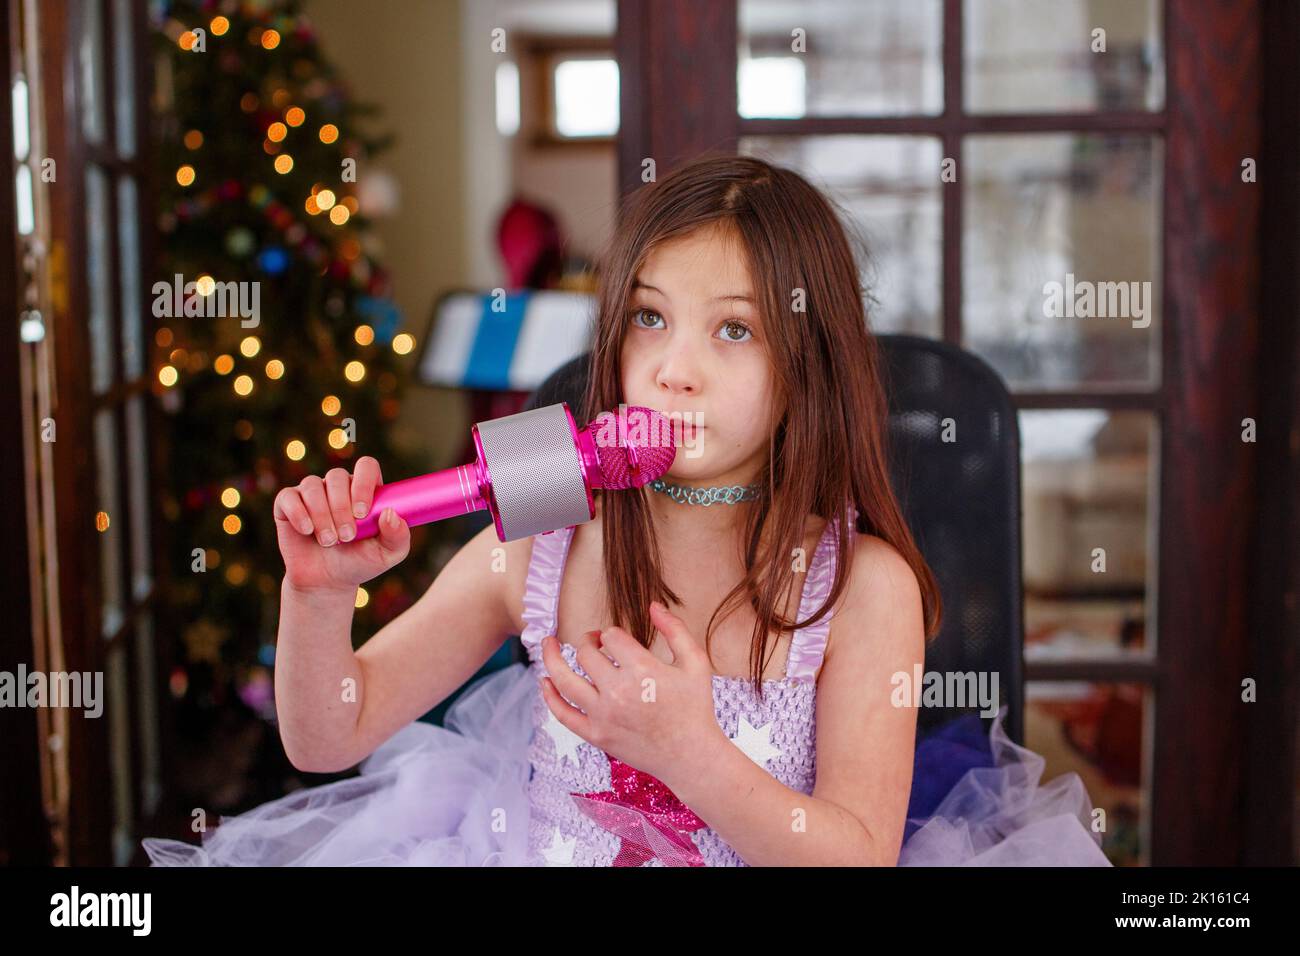 An earnest girl in tutu sings into a pink microphone at home Stock Photo